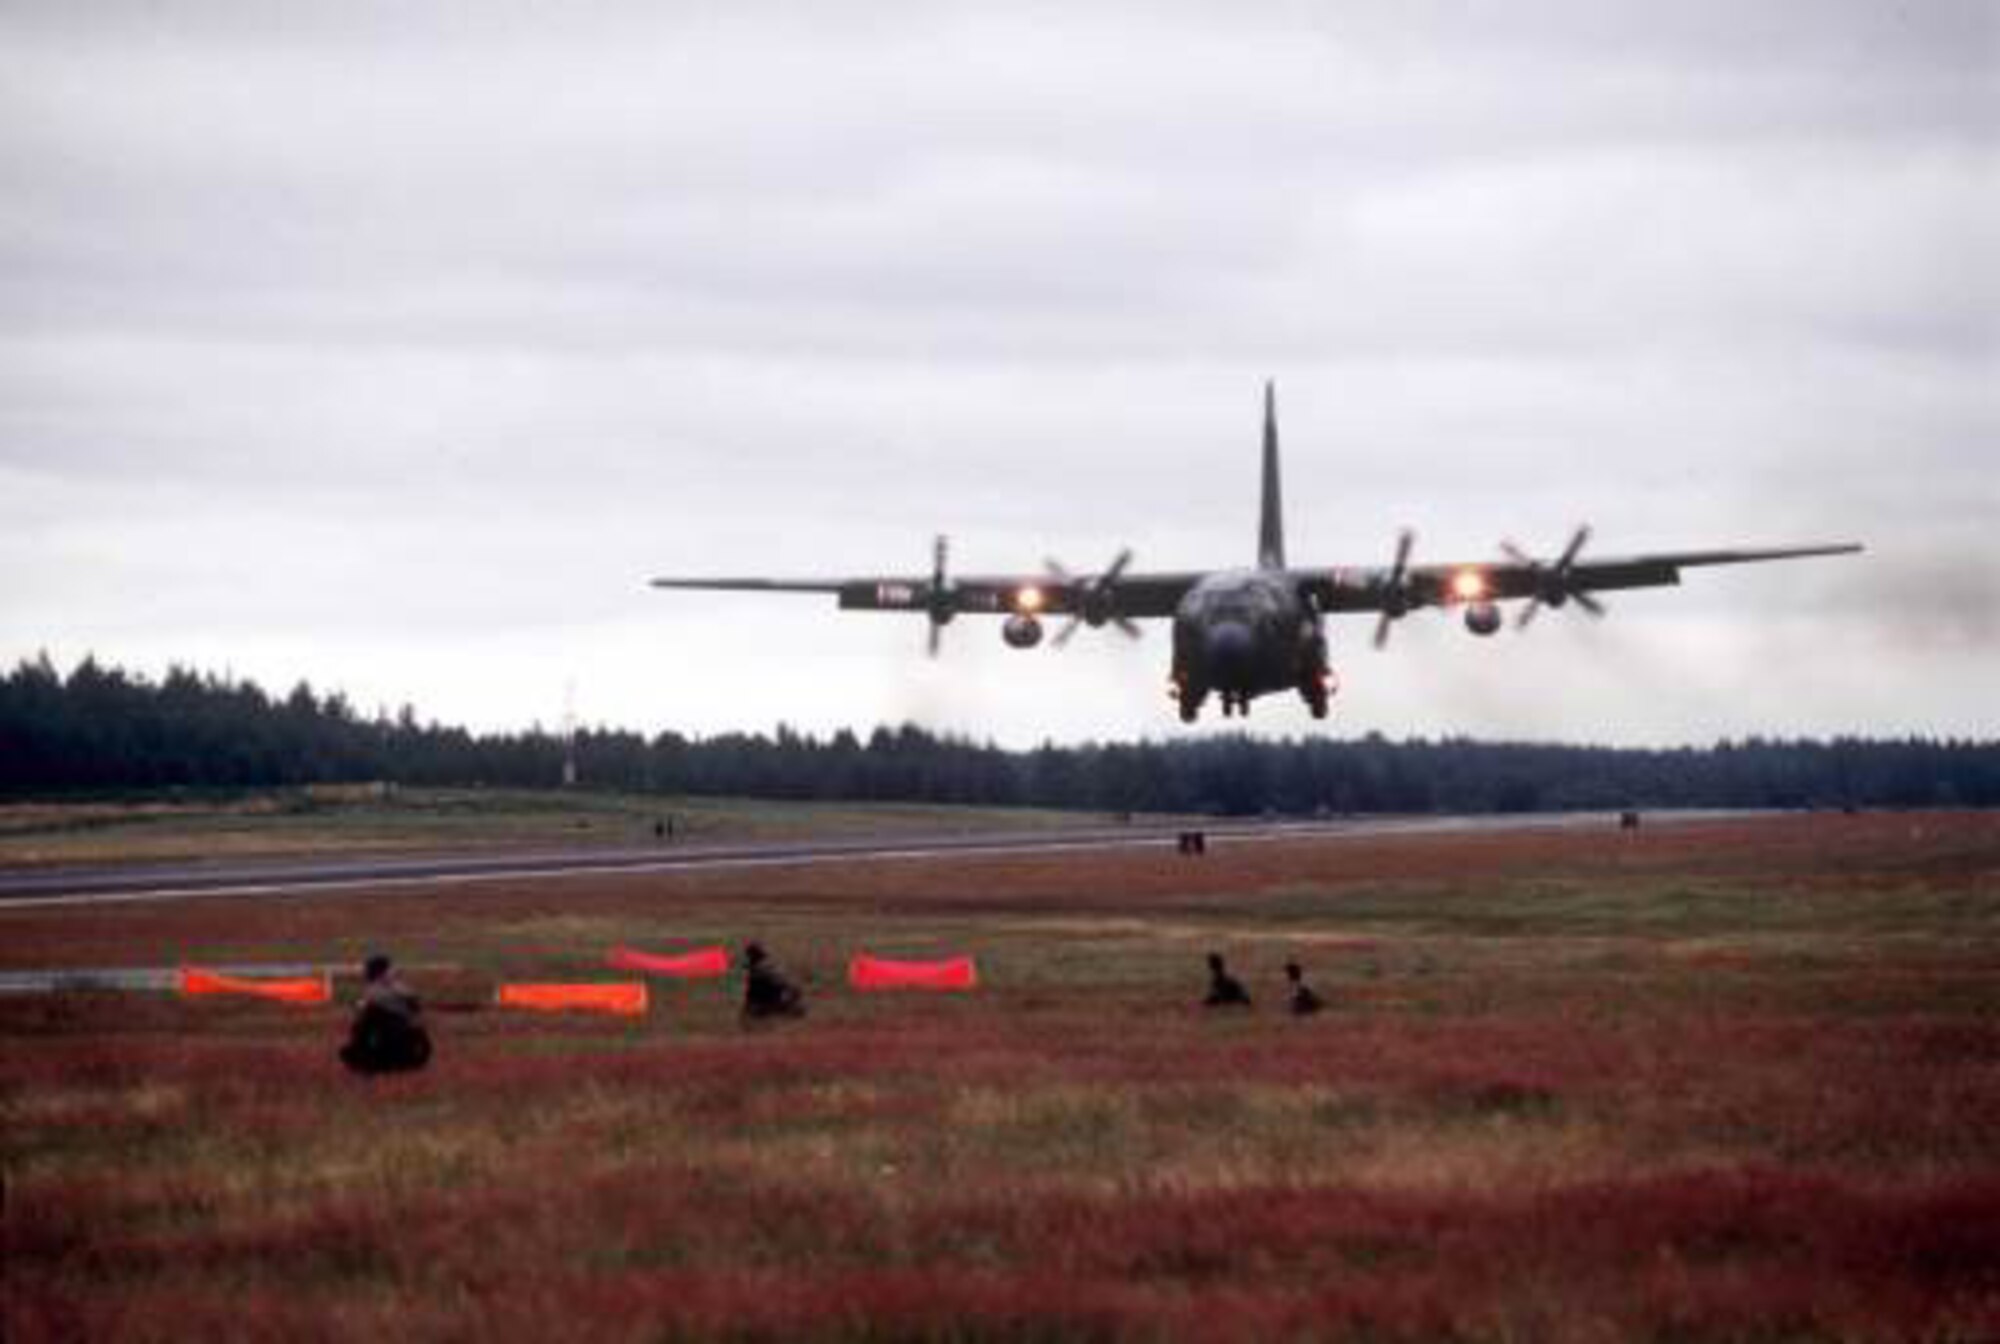 A C-130 Hercules prepares to land. C-130s are flown by Airmen assigned to the 913th Airlift Wing at Naval Air Station Joint Reserve Base in Willow Grove, Pa. Air Force Reserve Command officials briefed congressional leaders Jan. 3 on plans to deactivate the command's 913th AW. (U.S. Air Force photo)